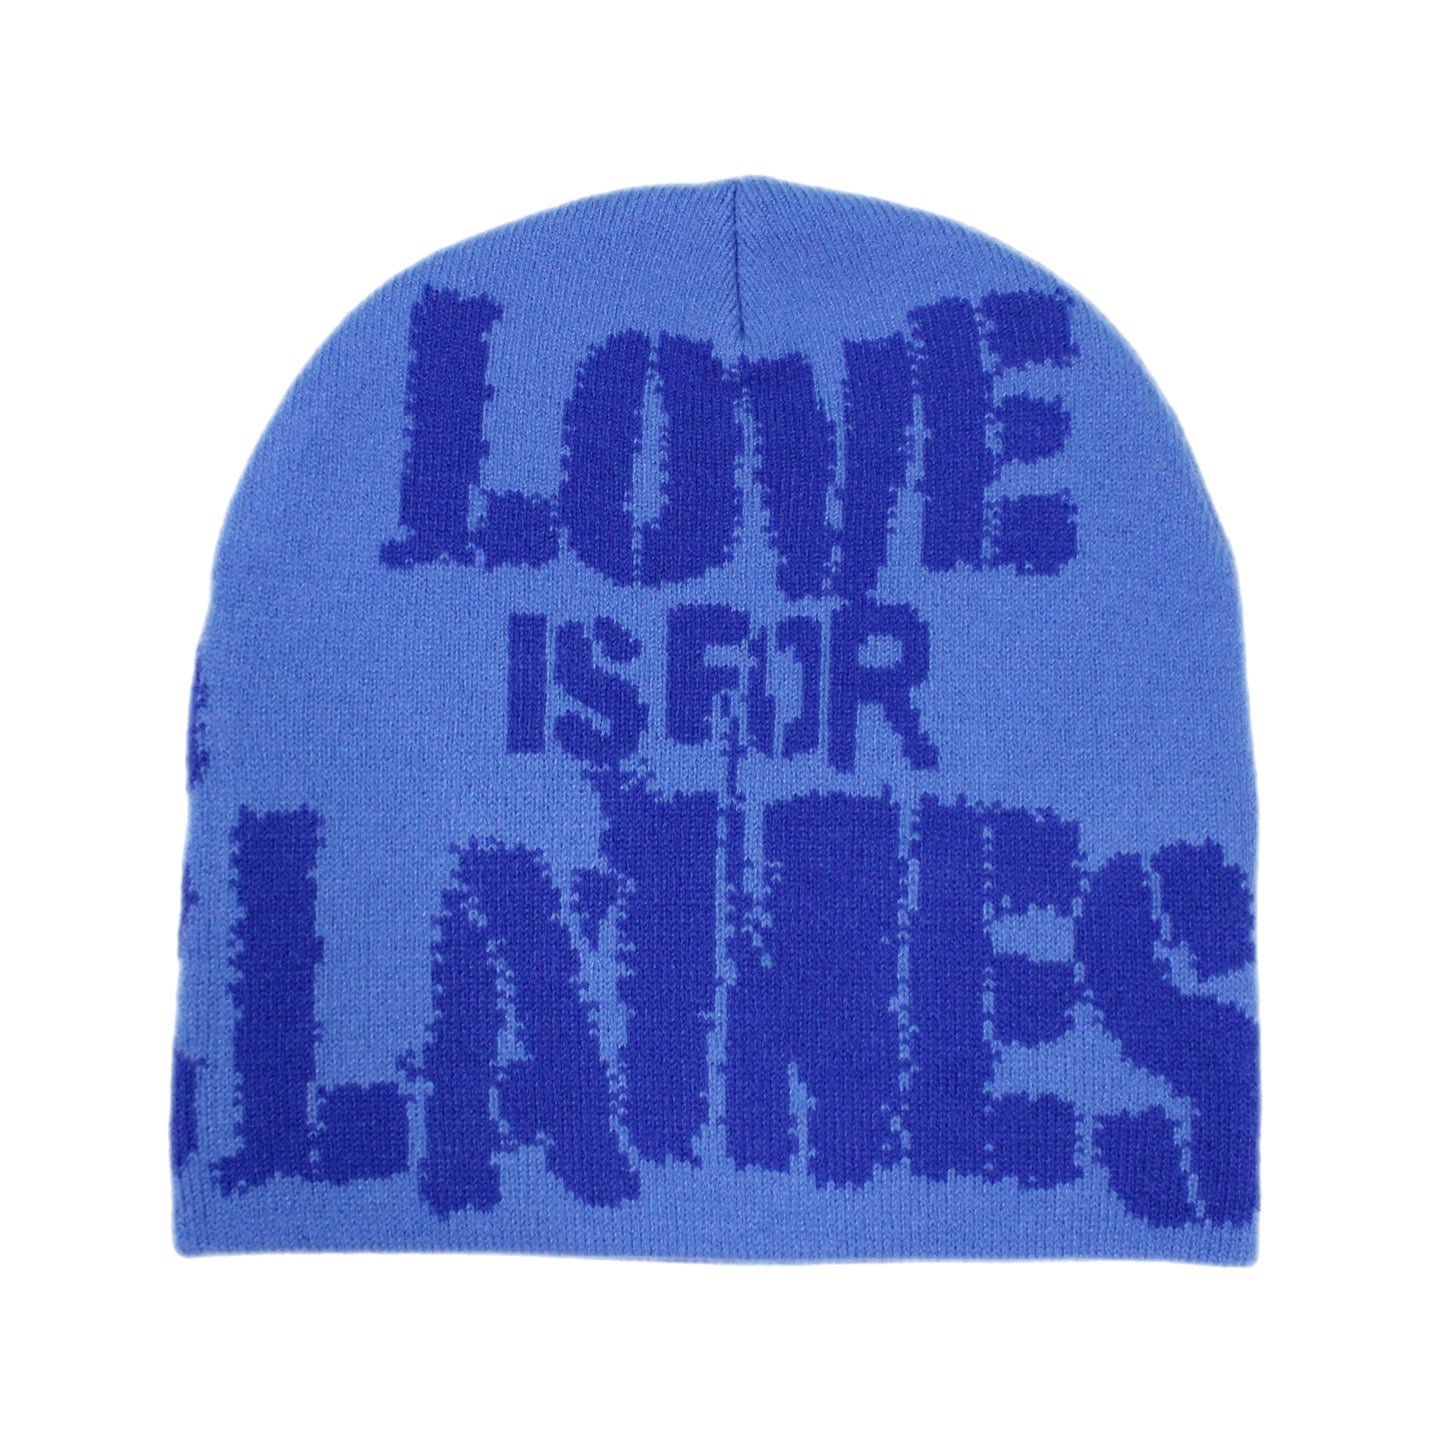 EVOL Love Is for Lames Beanie Blue On Blue